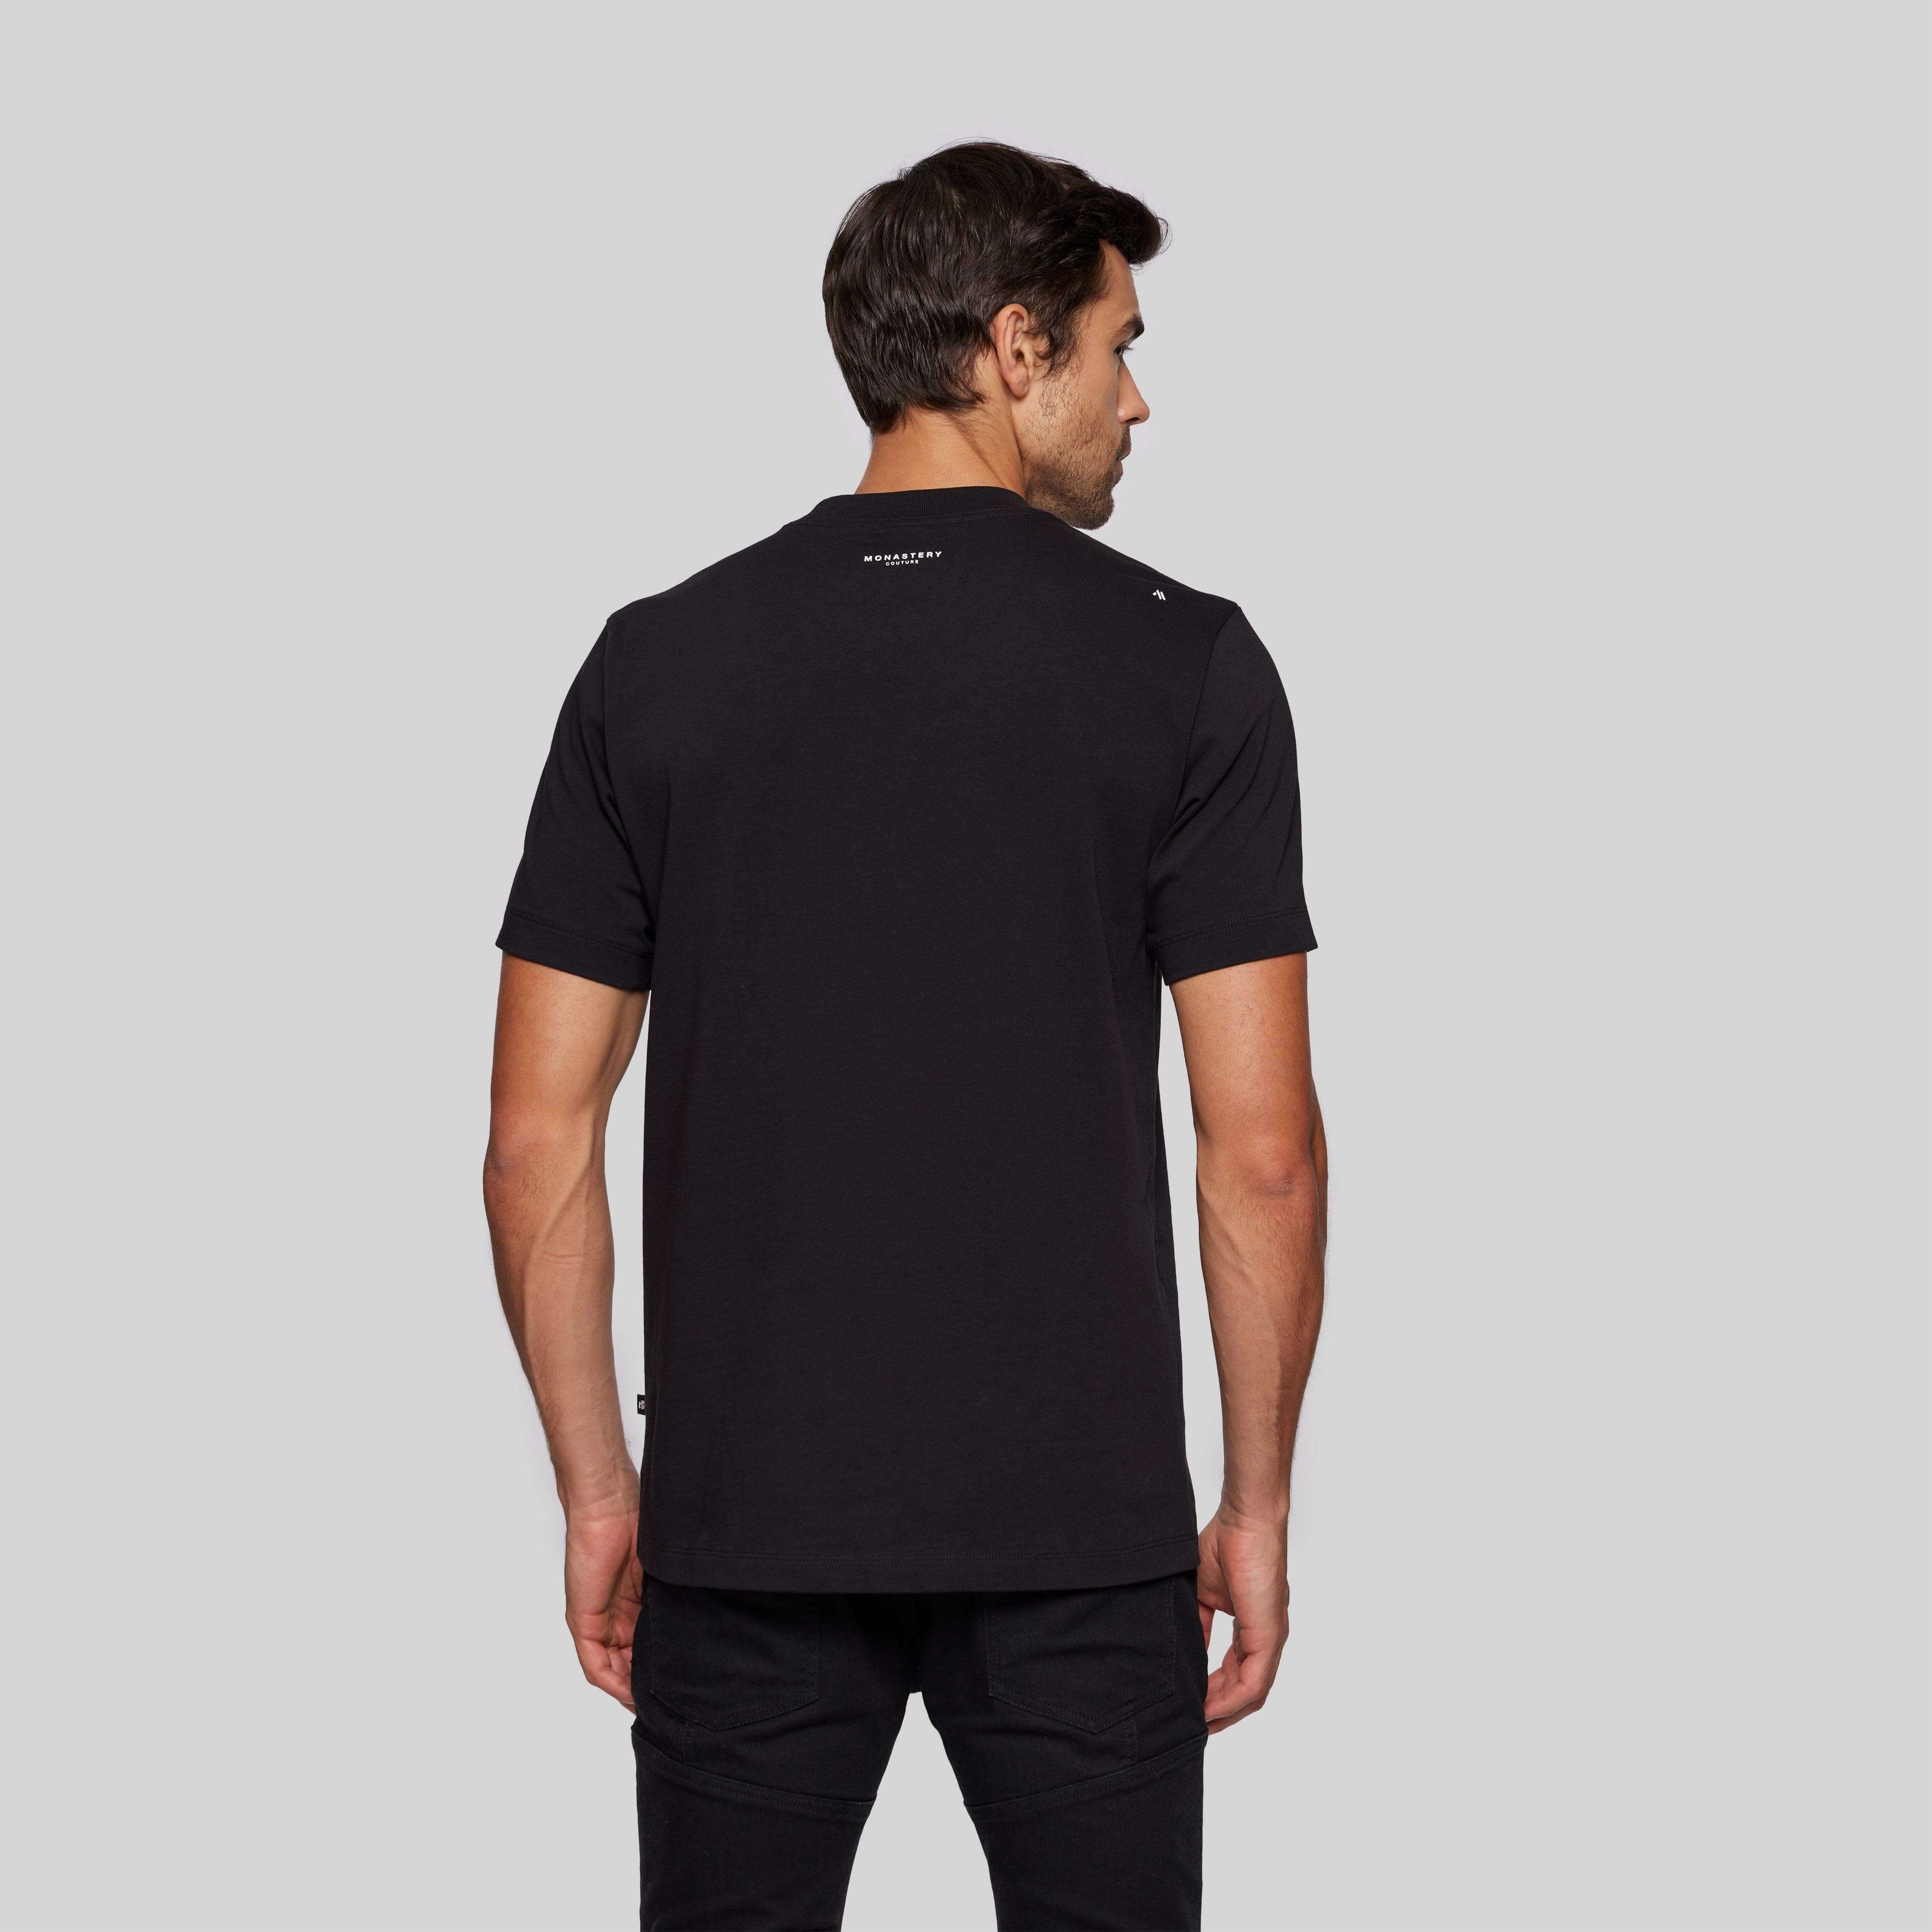 ASTRO BLACK T-SHIRT | Monastery Couture